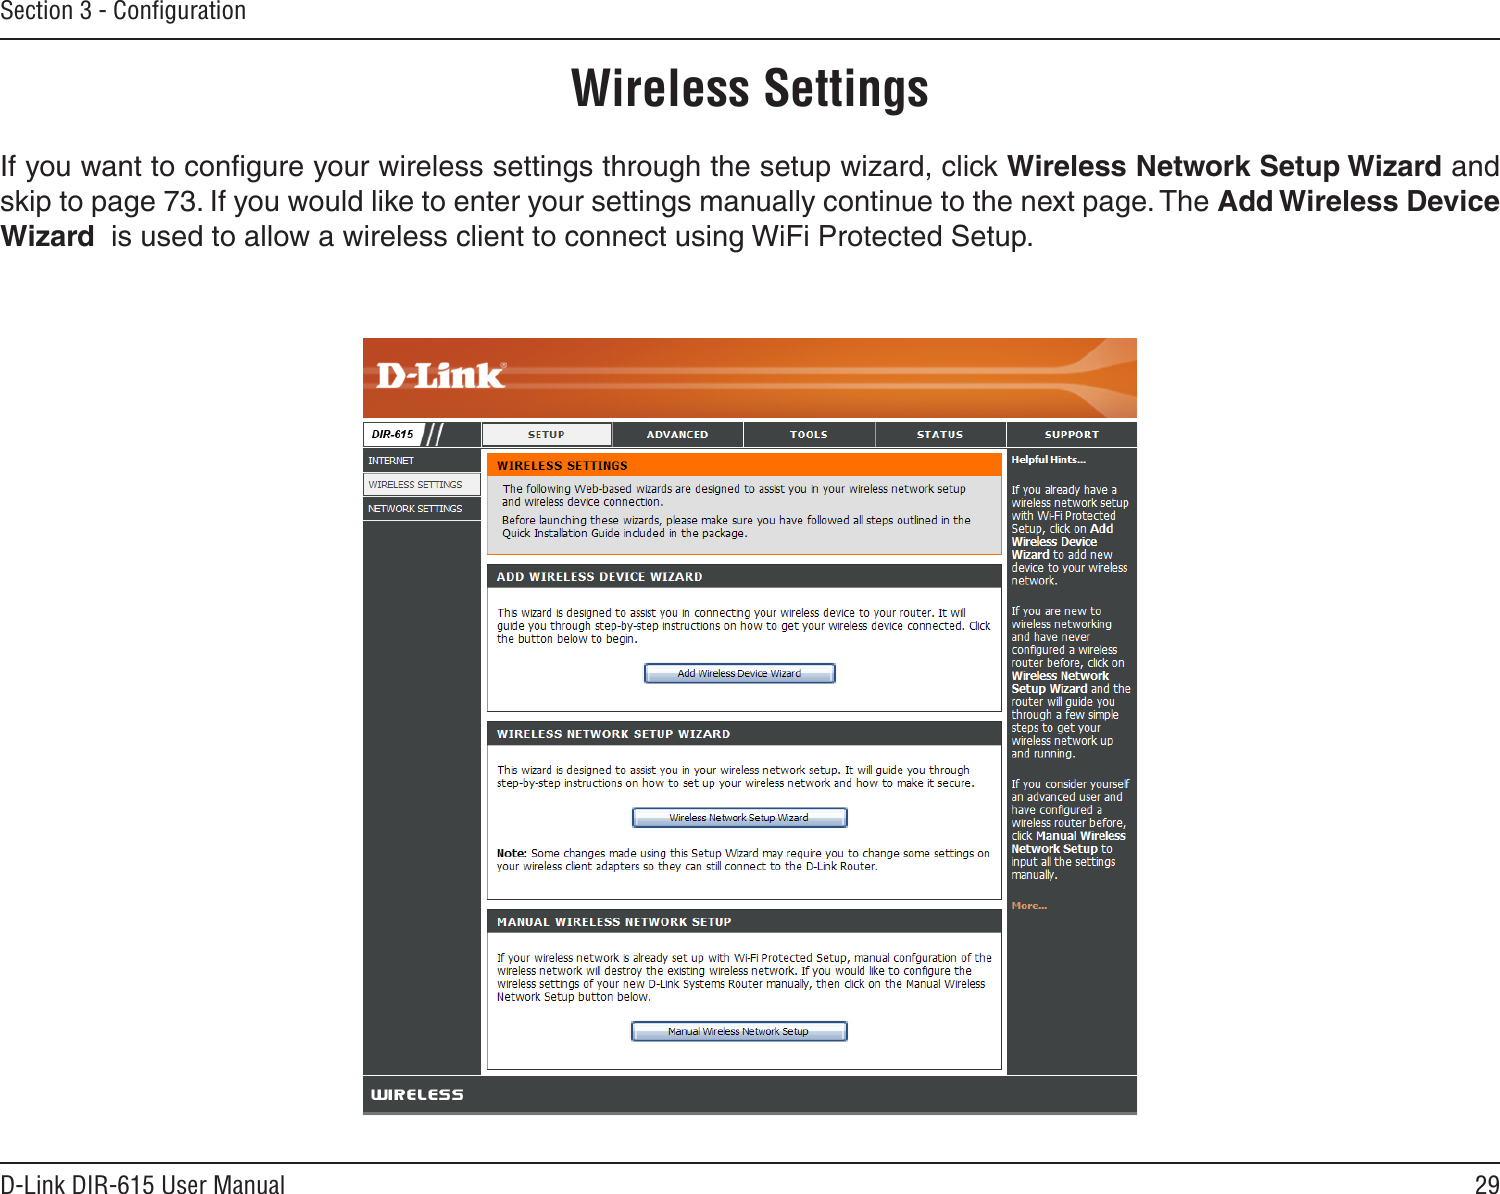 29D-Link DIR-615 User ManualSection 3 - ConﬁgurationWireless SettingsIf you want to conﬁgure your wireless settings through the setup wizard, click Wireless Network Setup Wizard and skip to page 73. If you would like to enter your settings manually continue to the next page. The Add Wireless Device Wizard  is used to allow a wireless client to connect using WiFi Protected Setup.